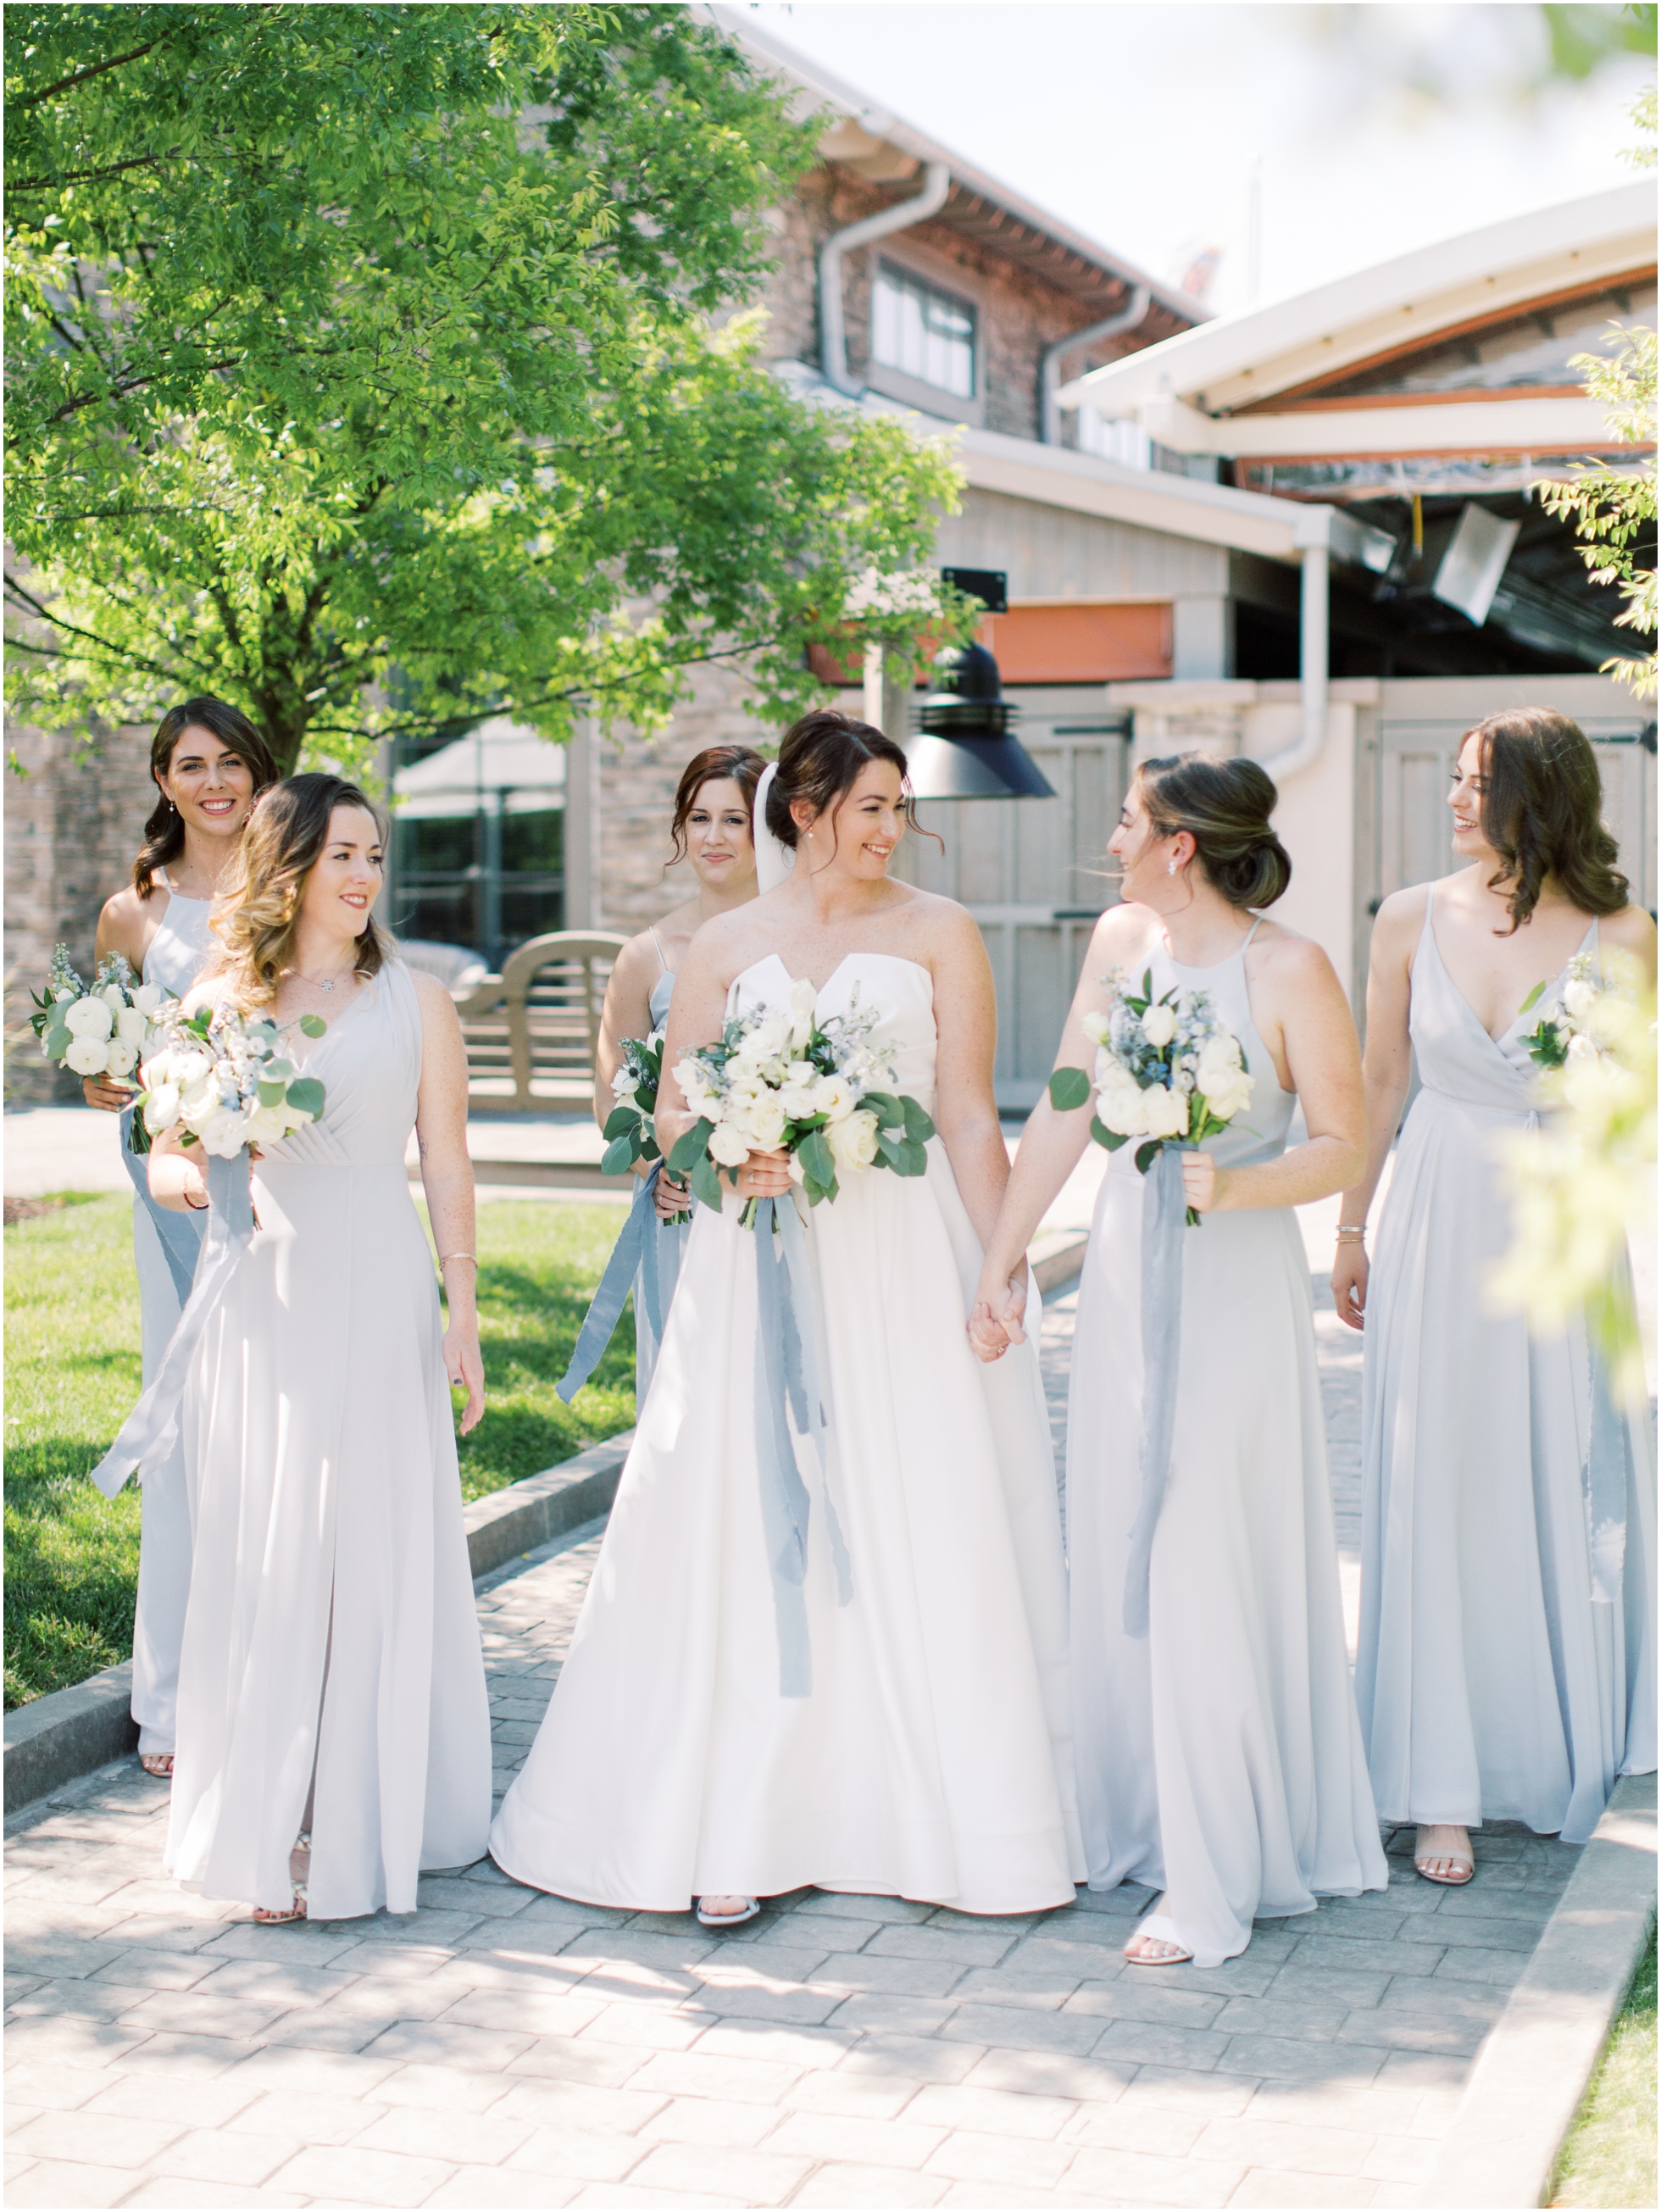 A Summer Wedding at Chesapeake Bay Beach Club with the Most Stunning DIY Details